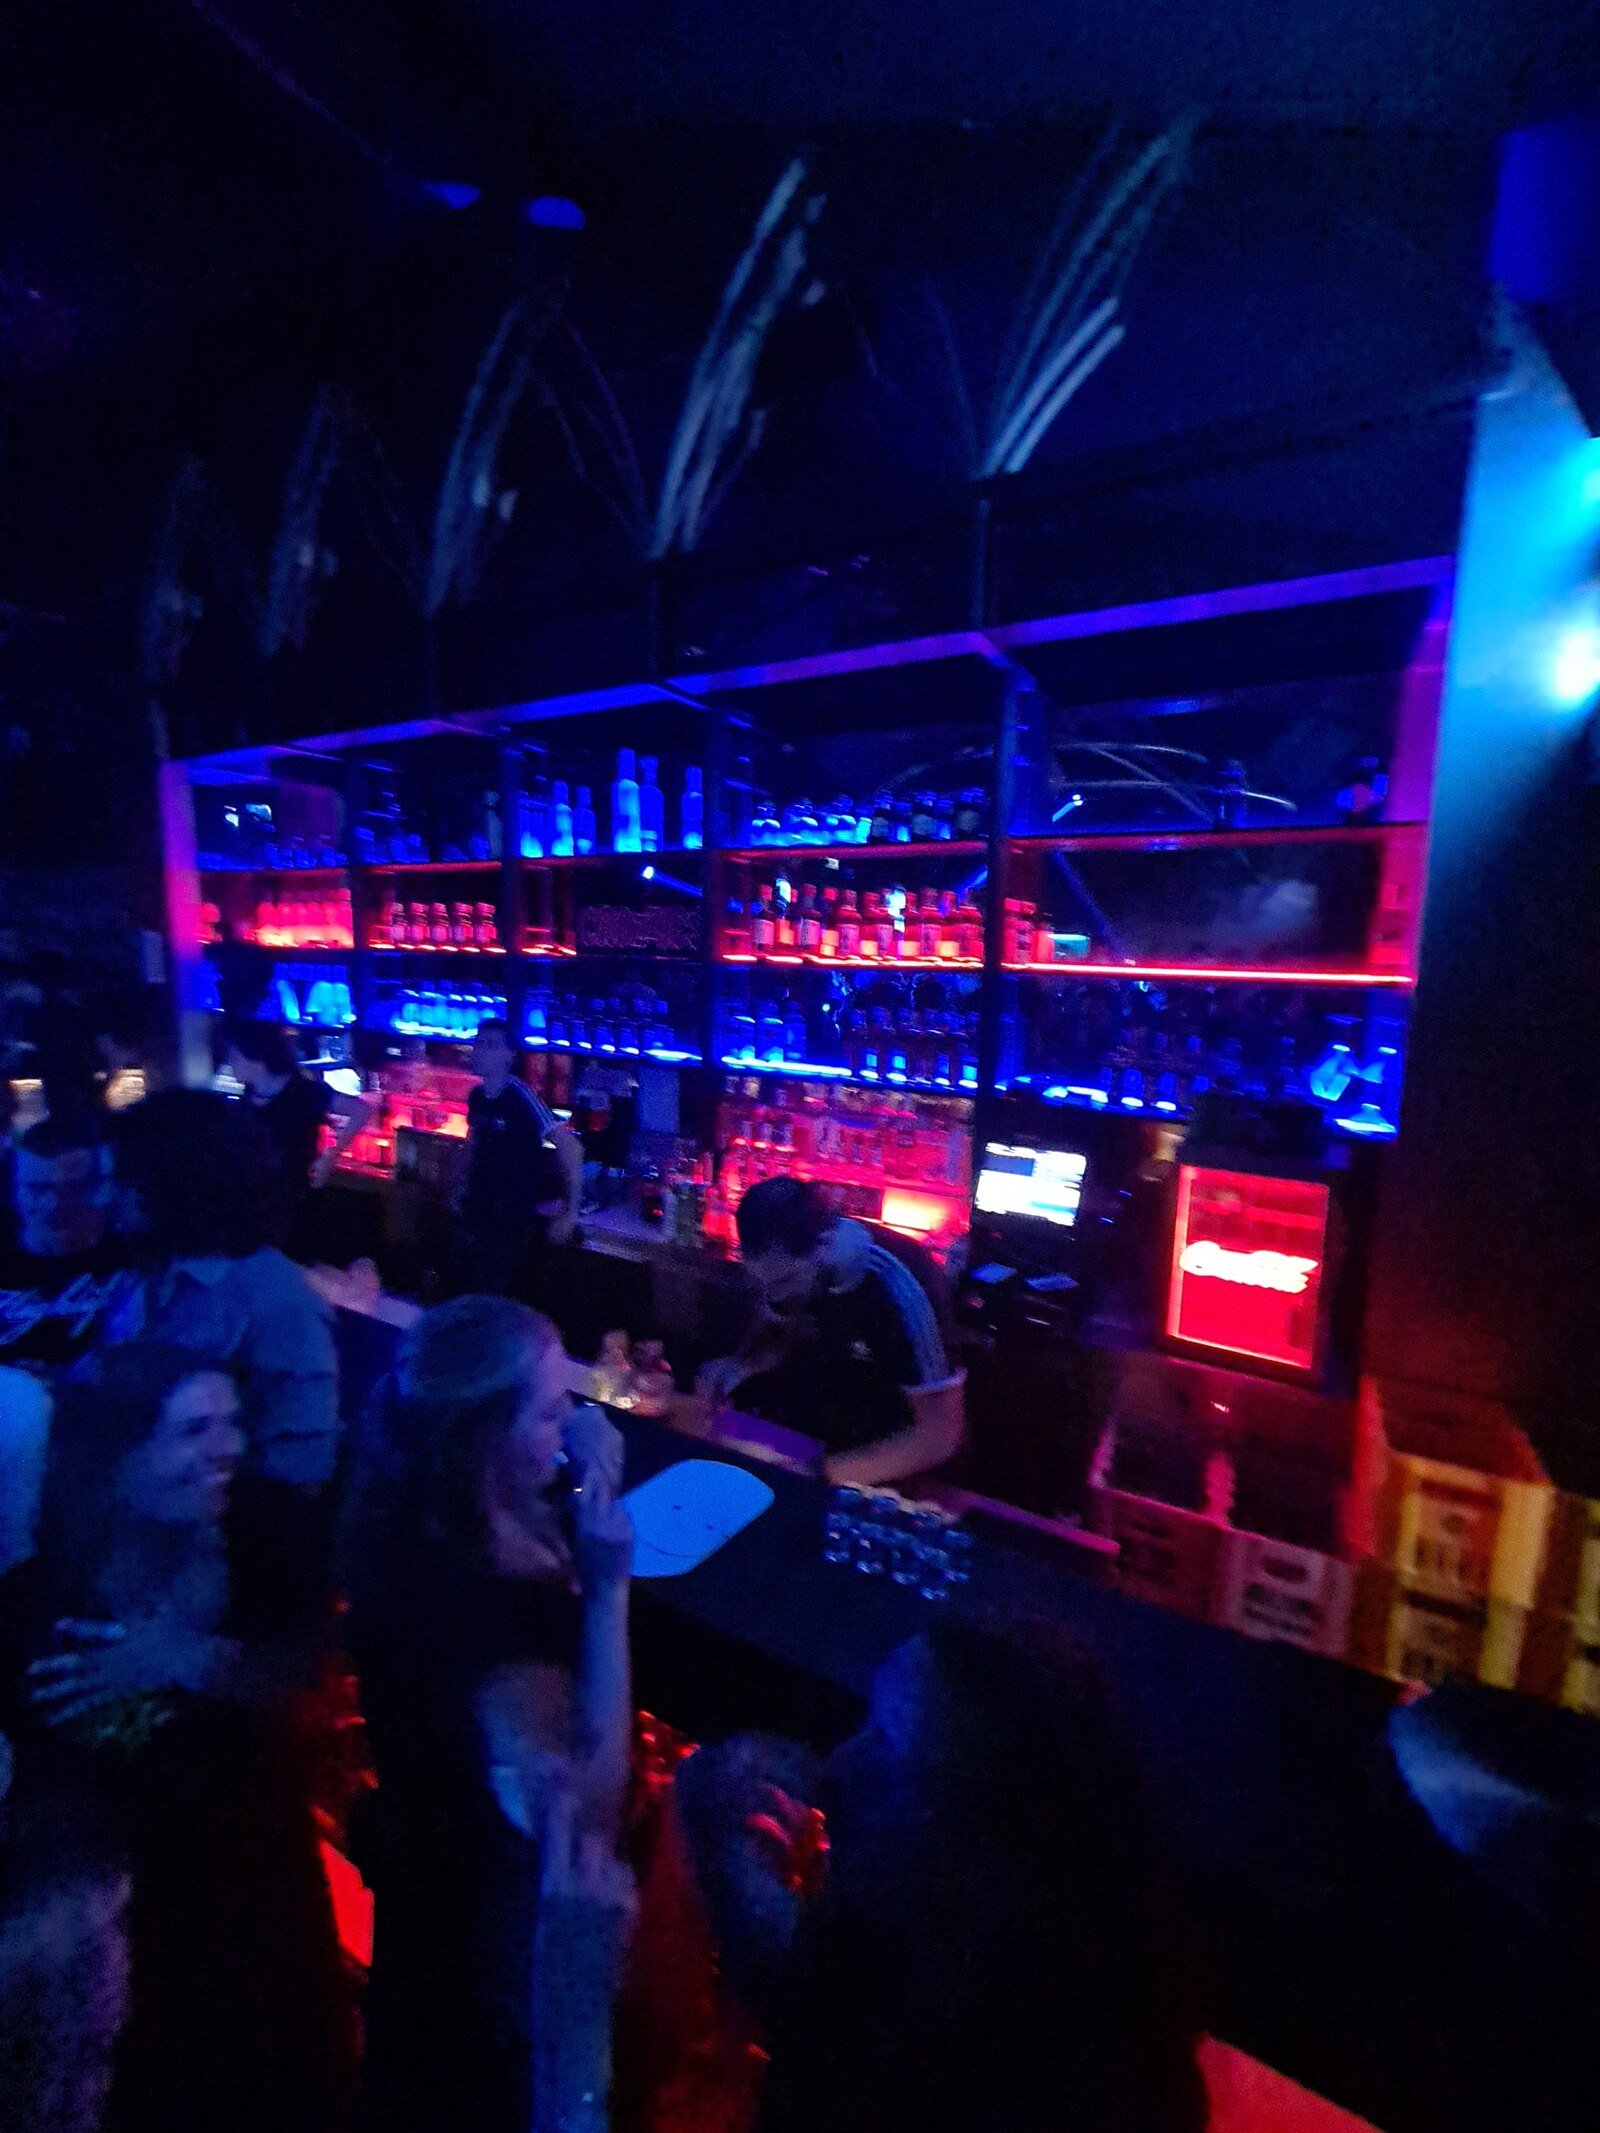 a dark image of a bar in a club with drinks being lined up on the bar